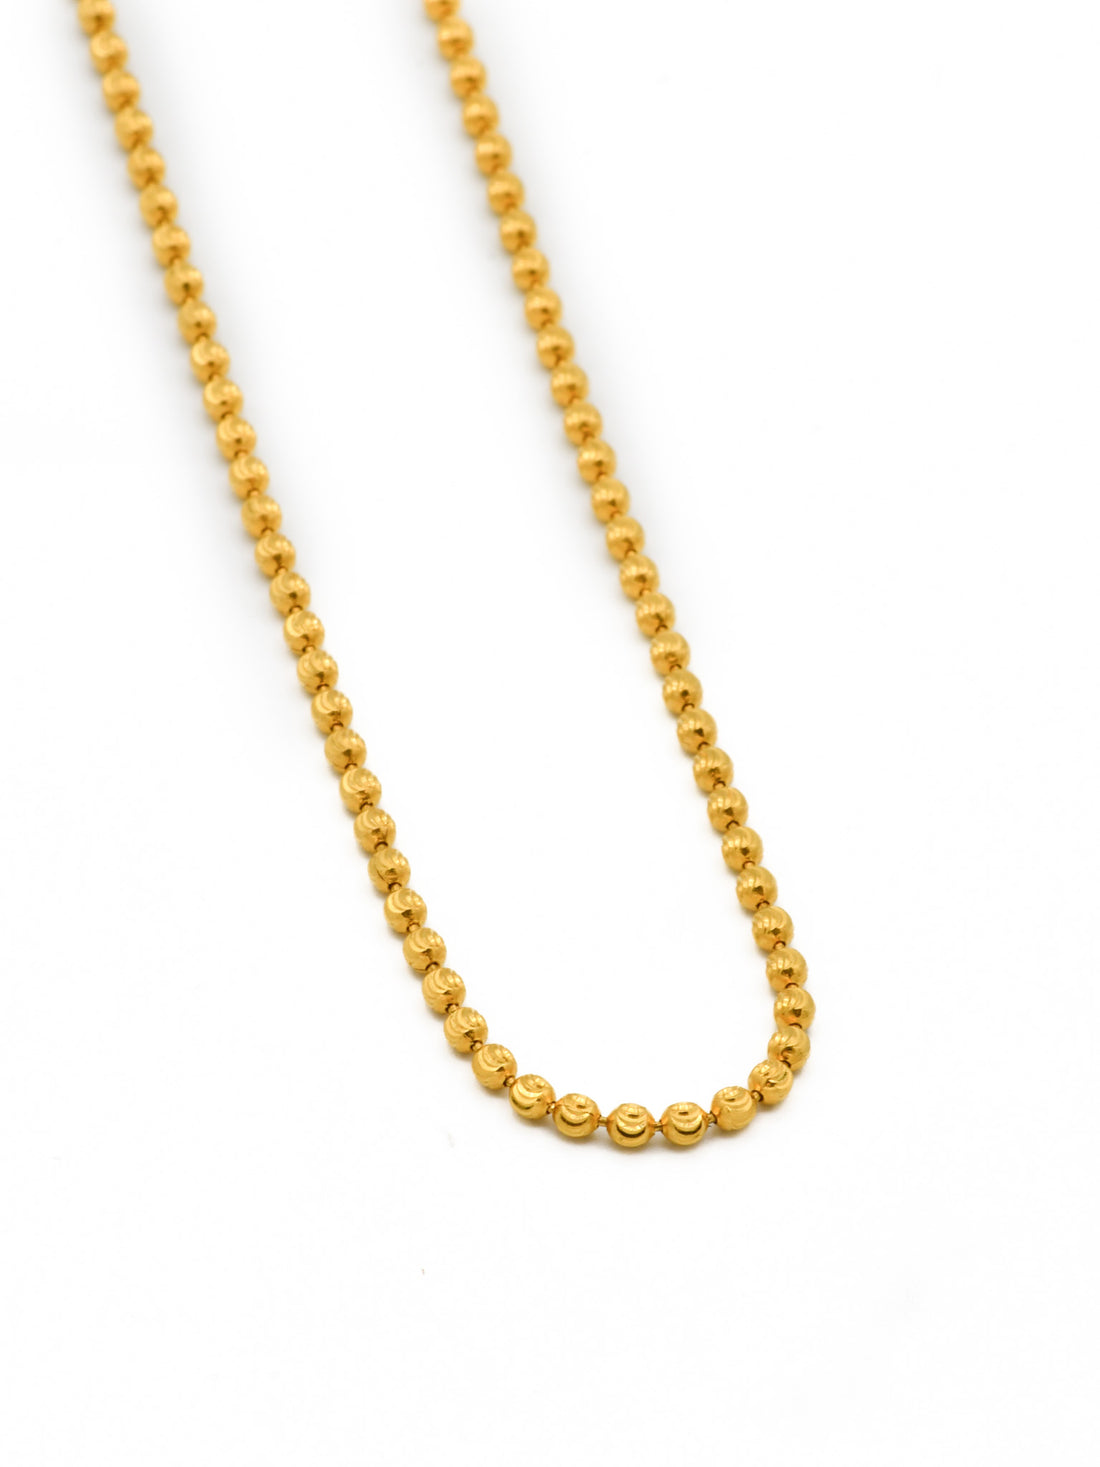 22ct Gold Ball Chain - Roop Darshan